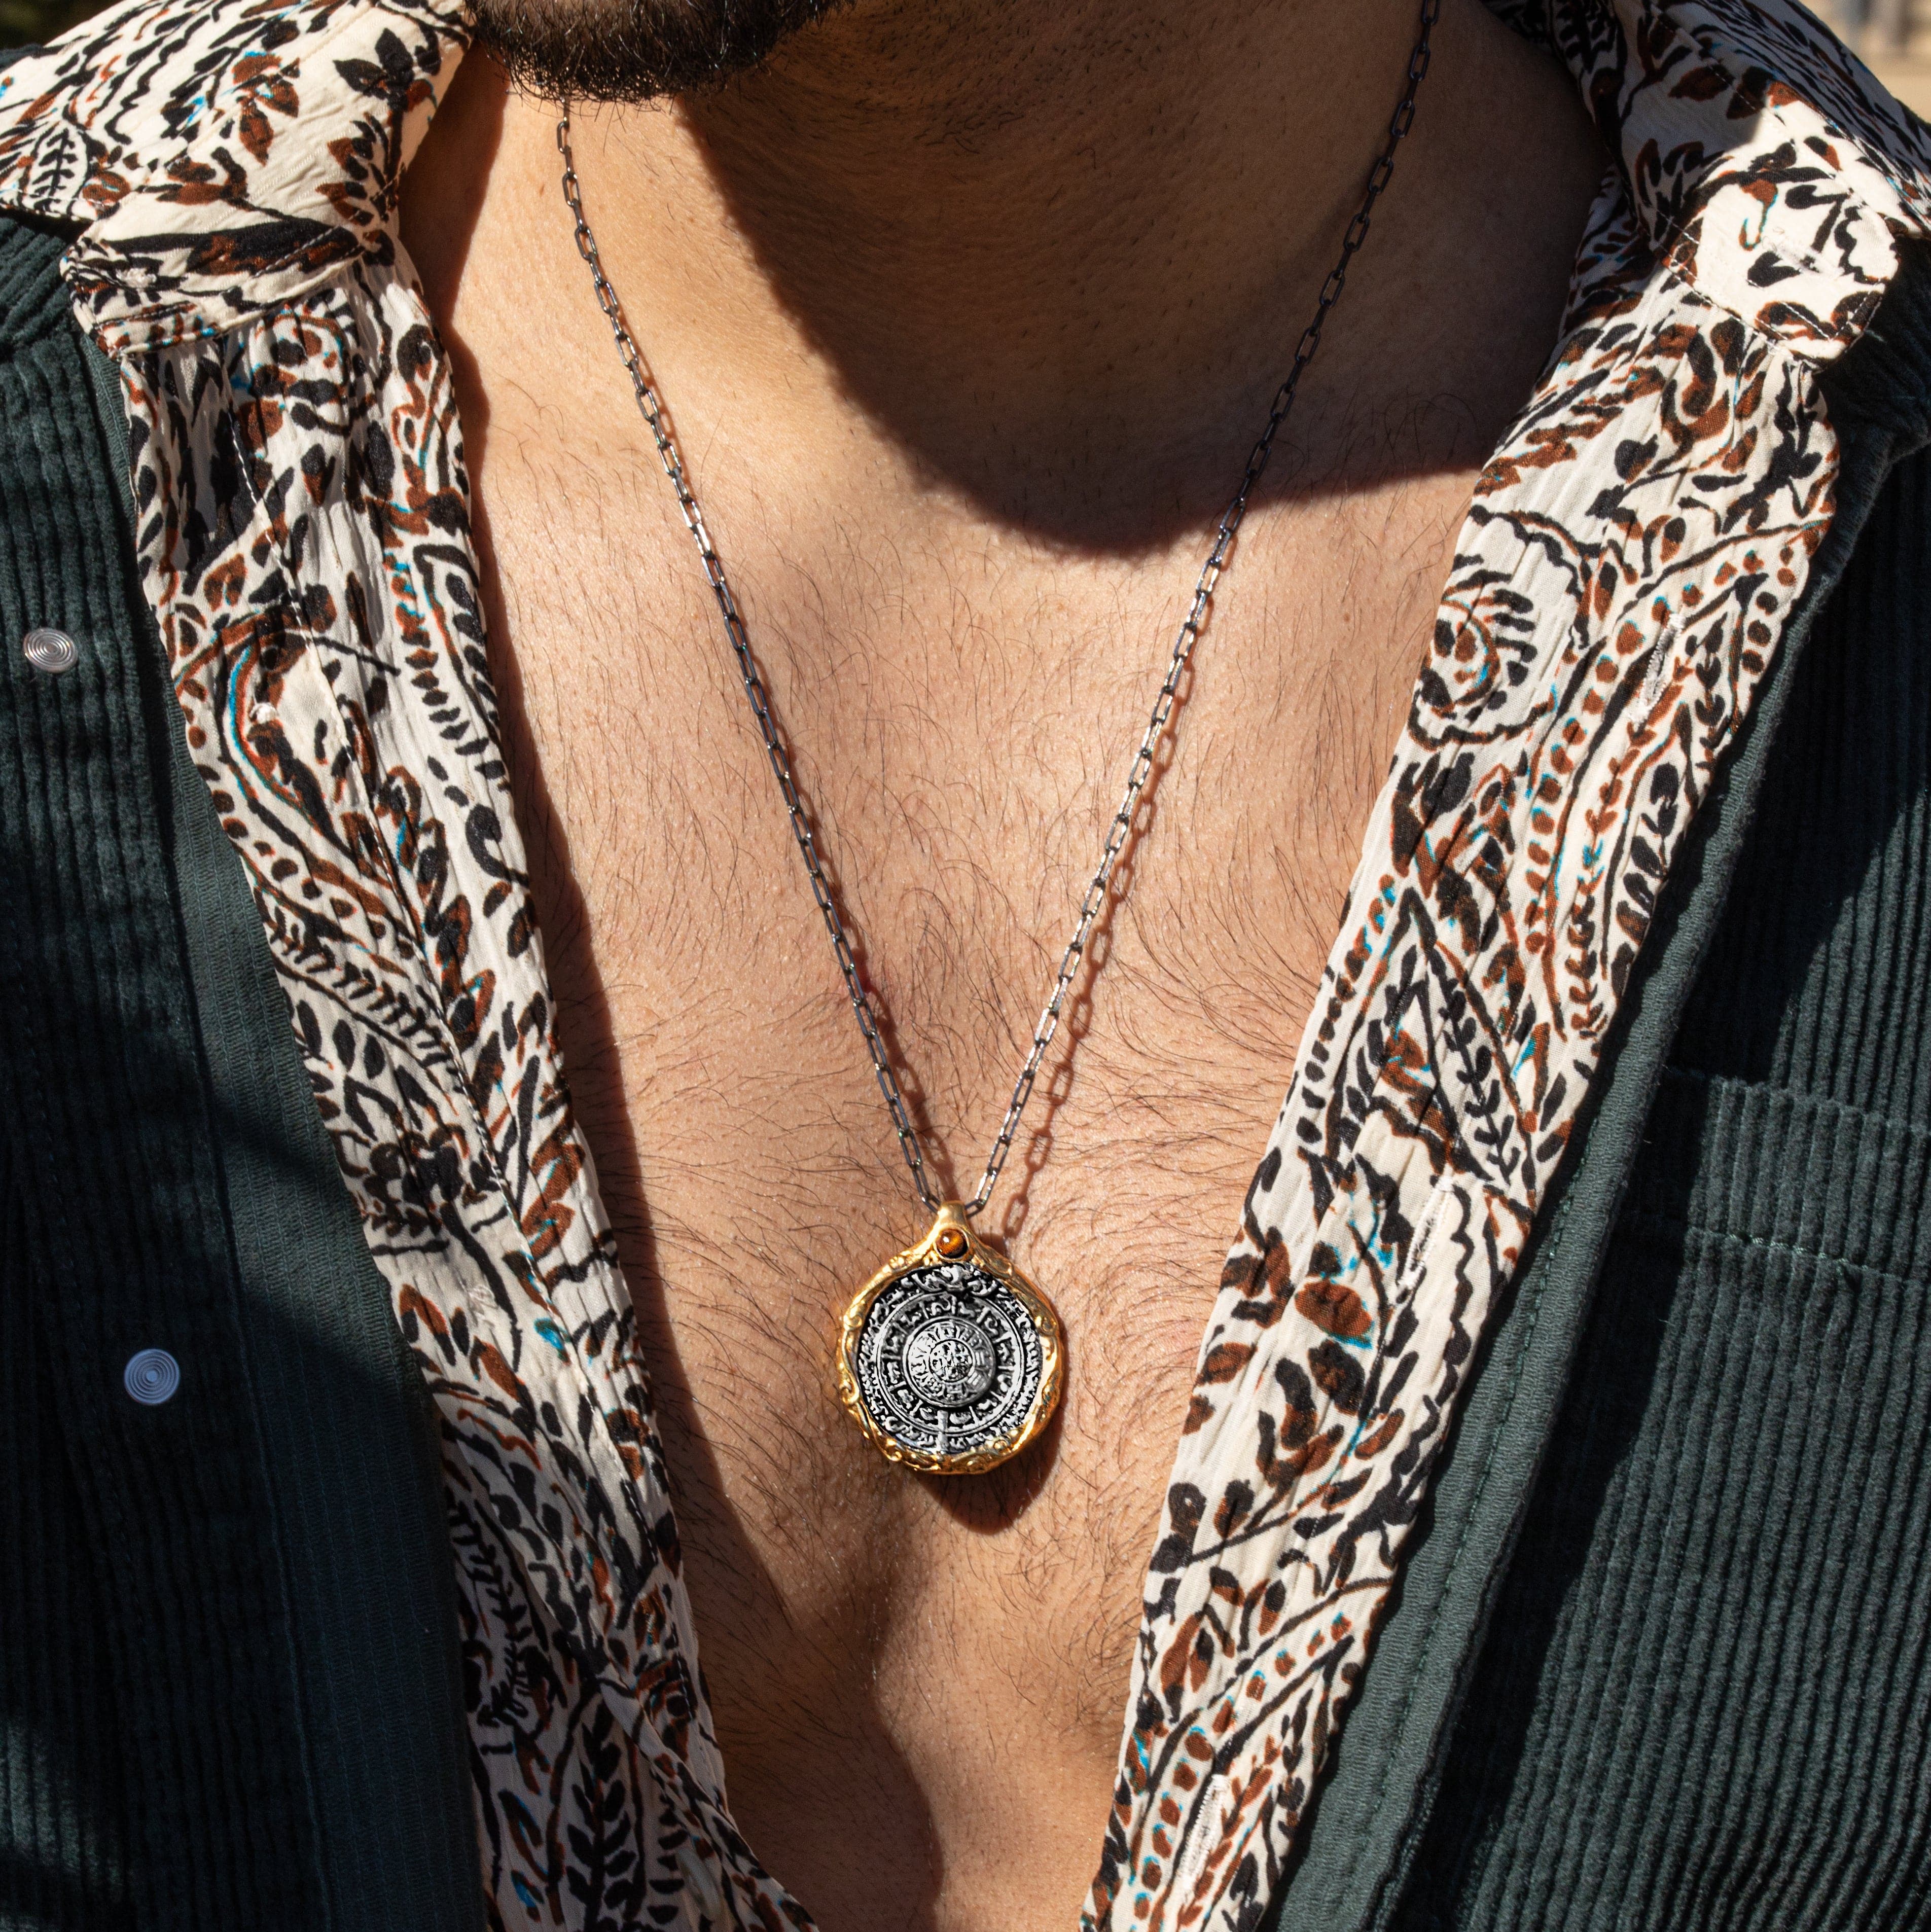 Karma and Luck  Necklaces - Mens  -  Universal Harmony - Tiger's Eye Chinese Zodiac Wheel Necklace